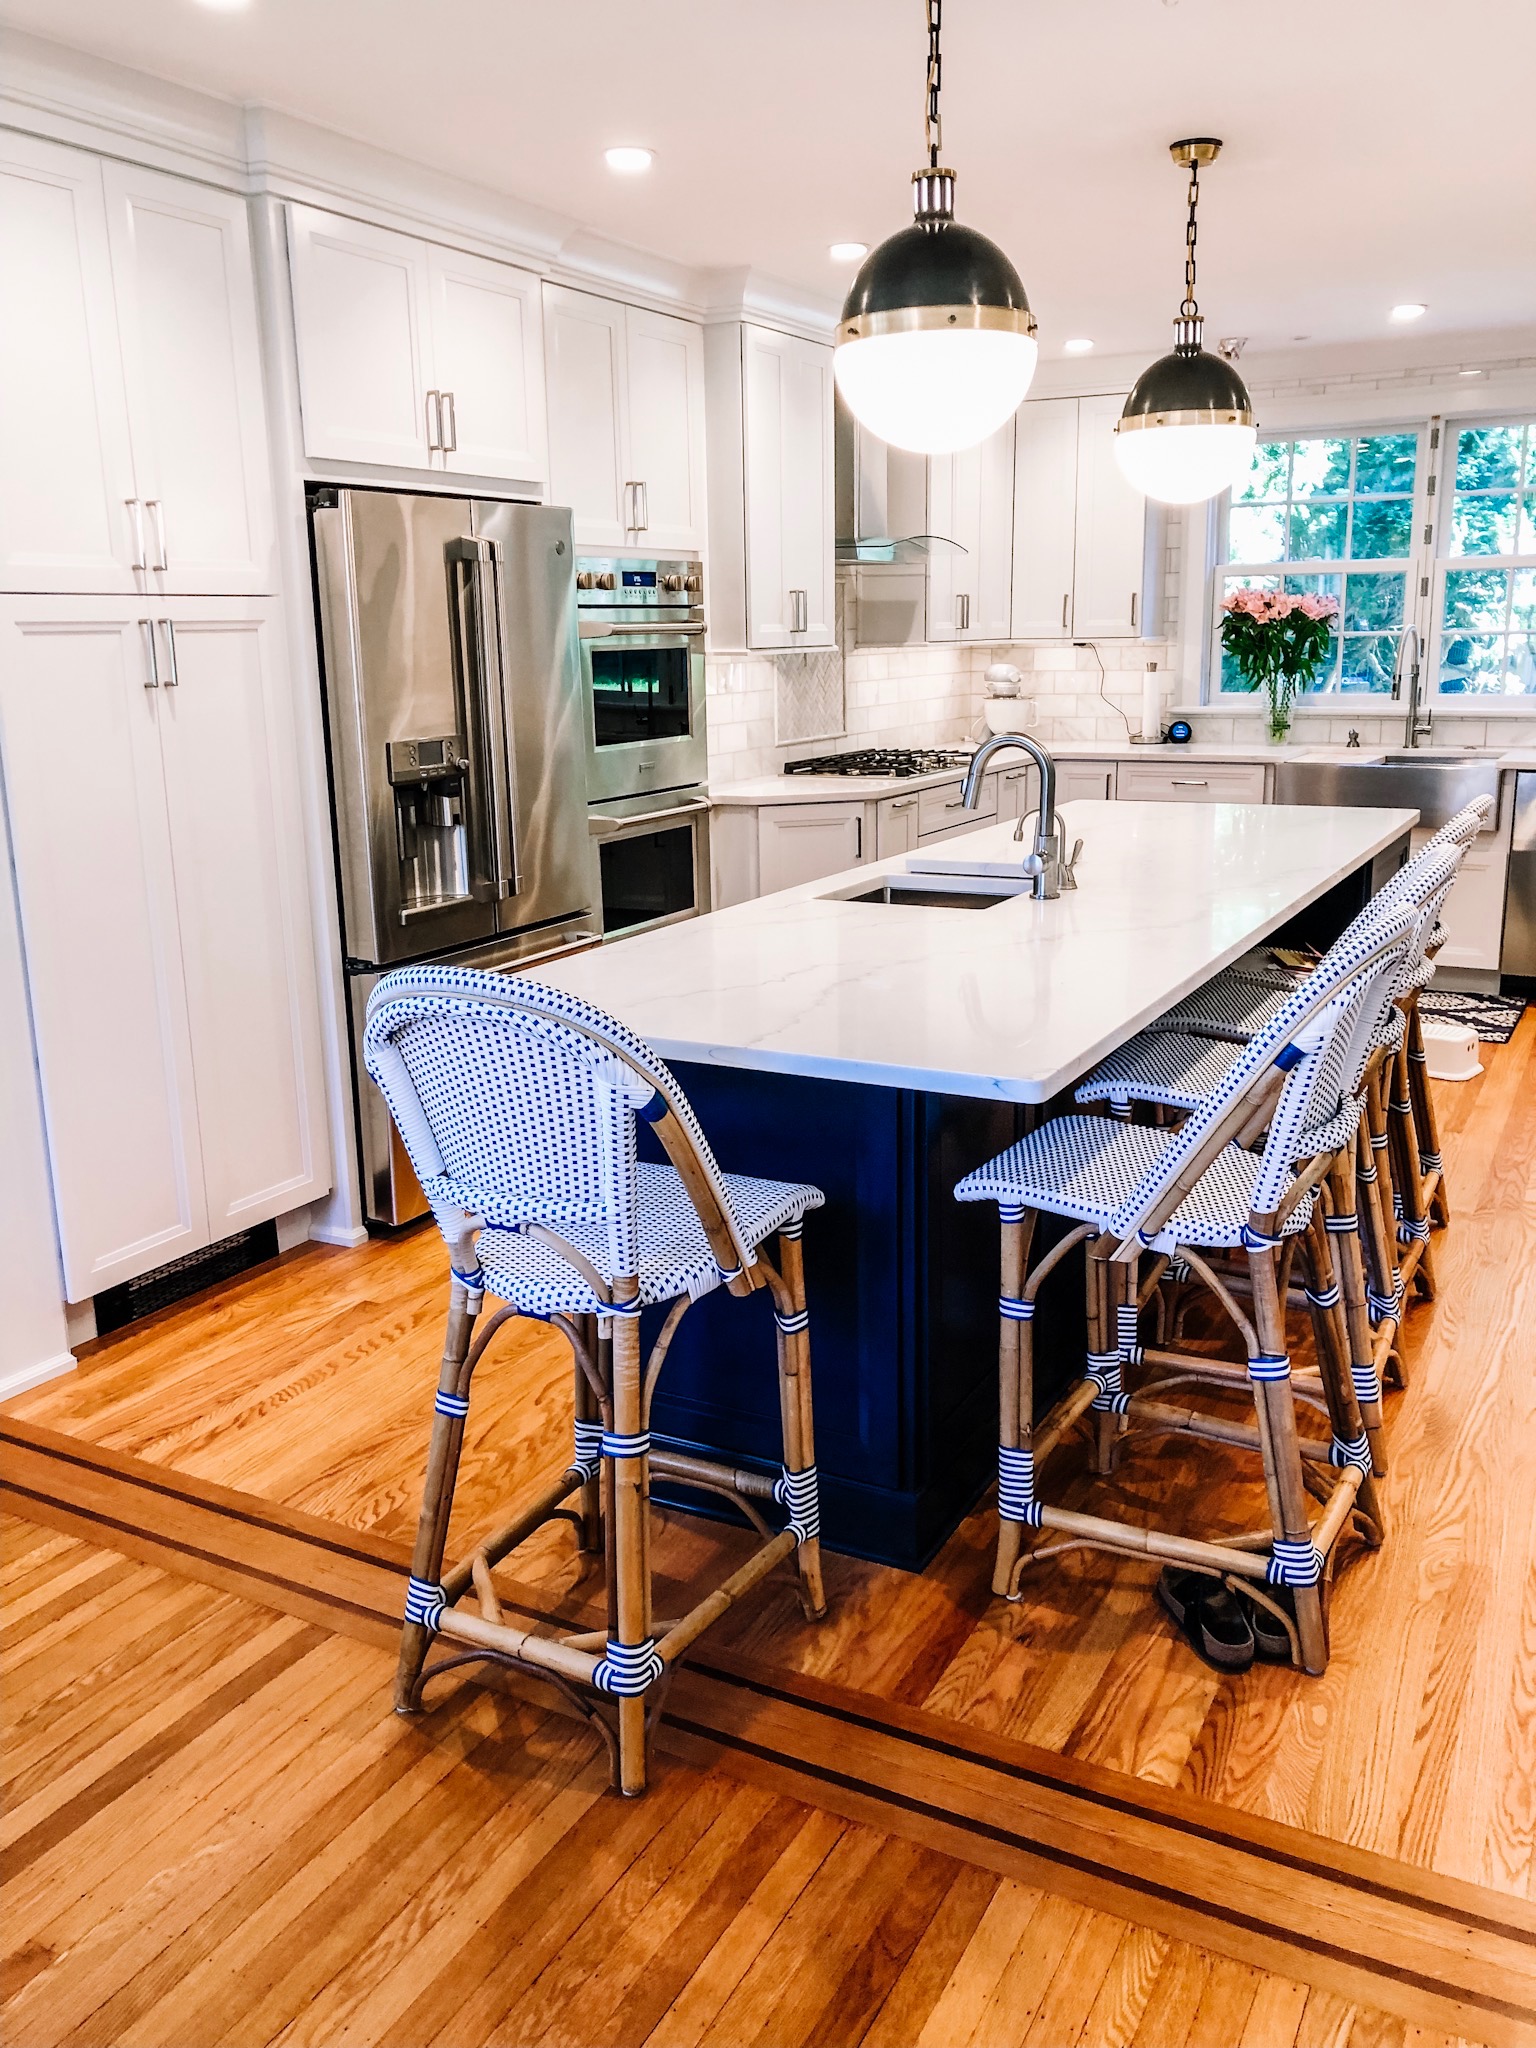 Transitional kitchen with white cabinets and navy blue island.